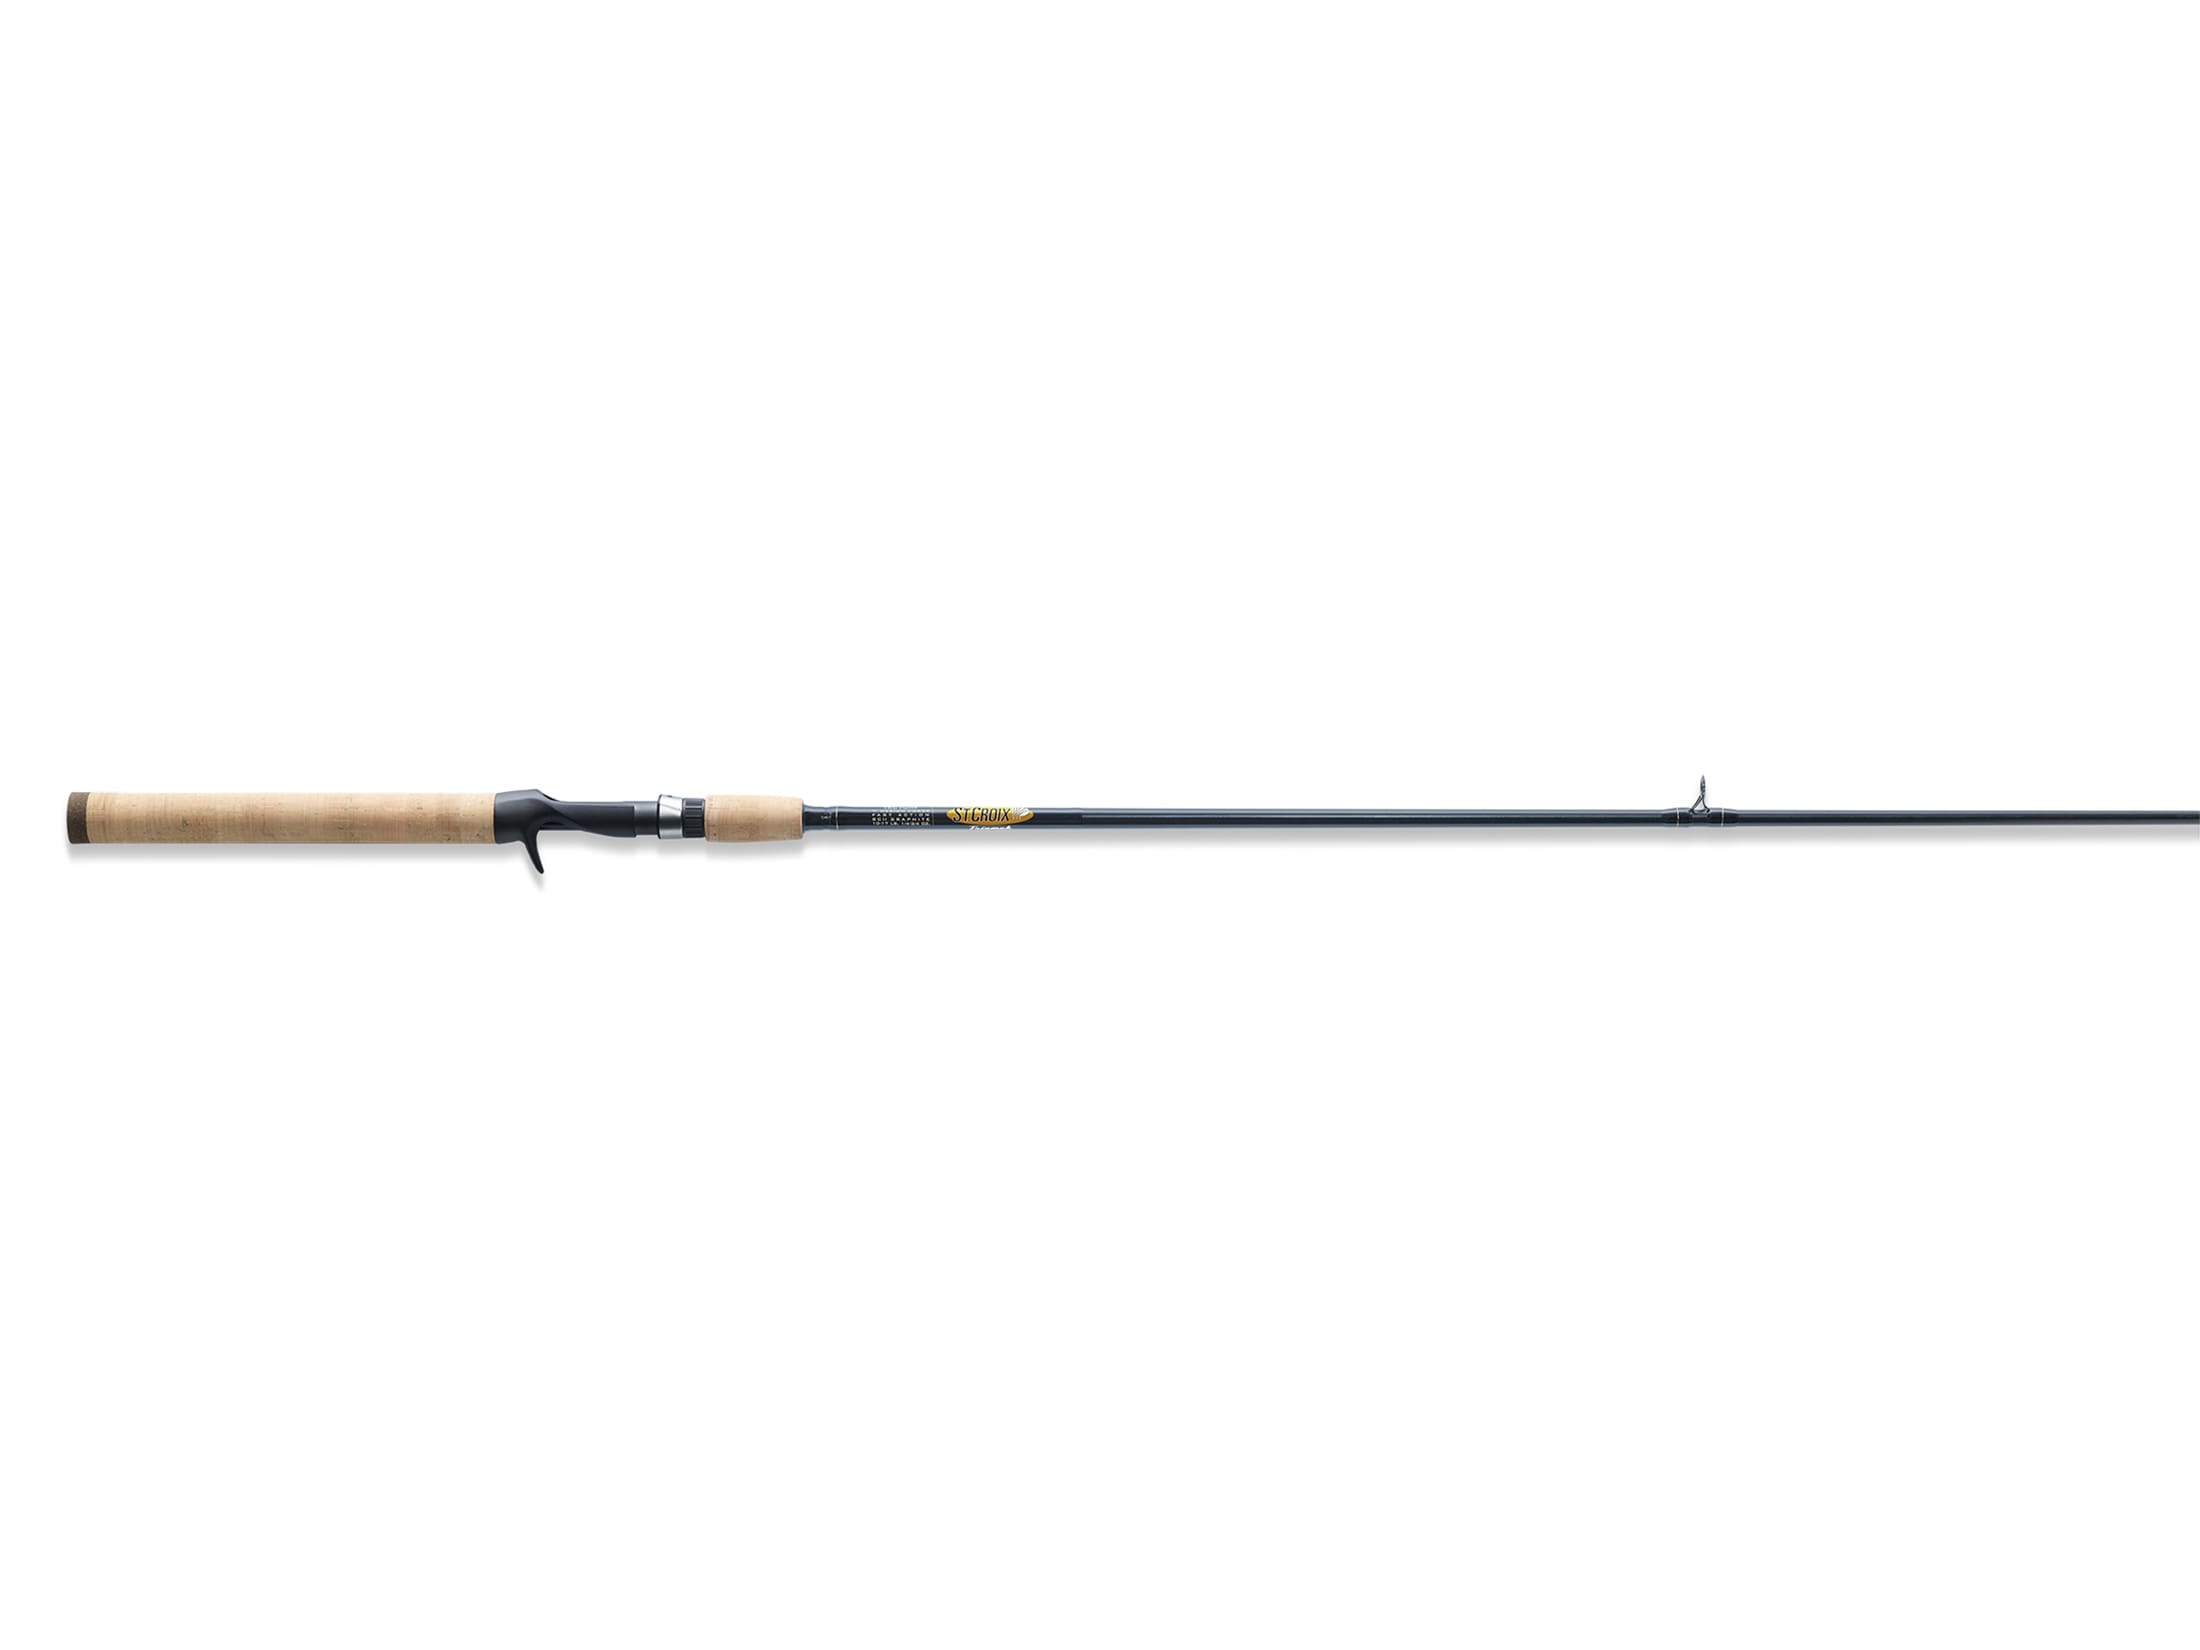 2021: Angling Travel is Back - St. Croix Rod